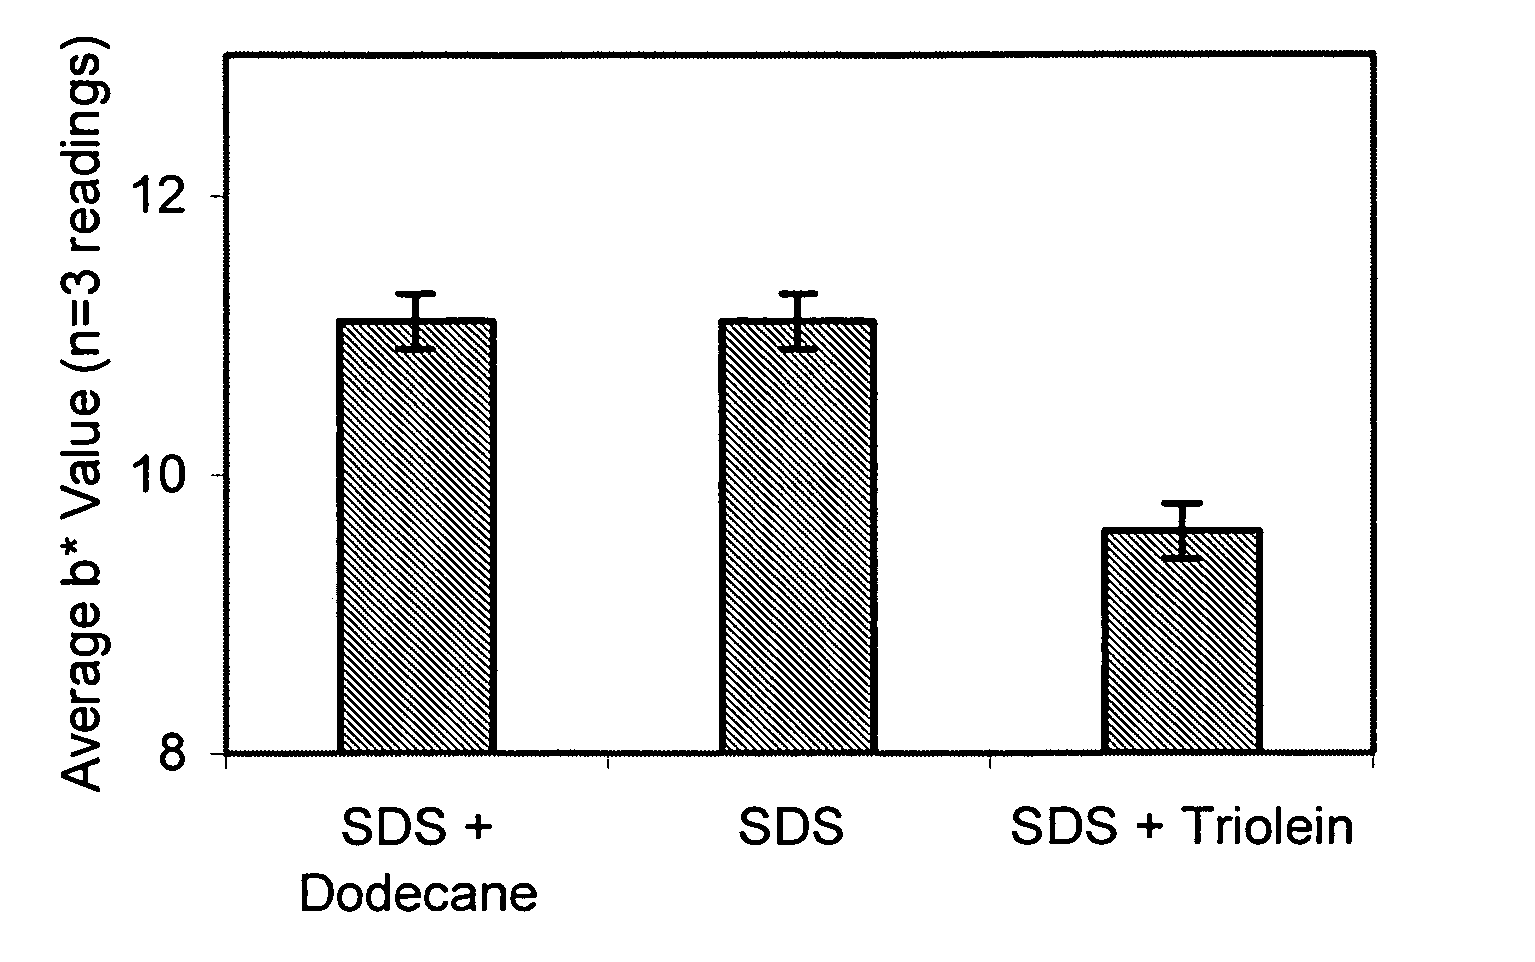 Method of reducing surfactant damage using compositions comprising benefit agents of defined high polarity